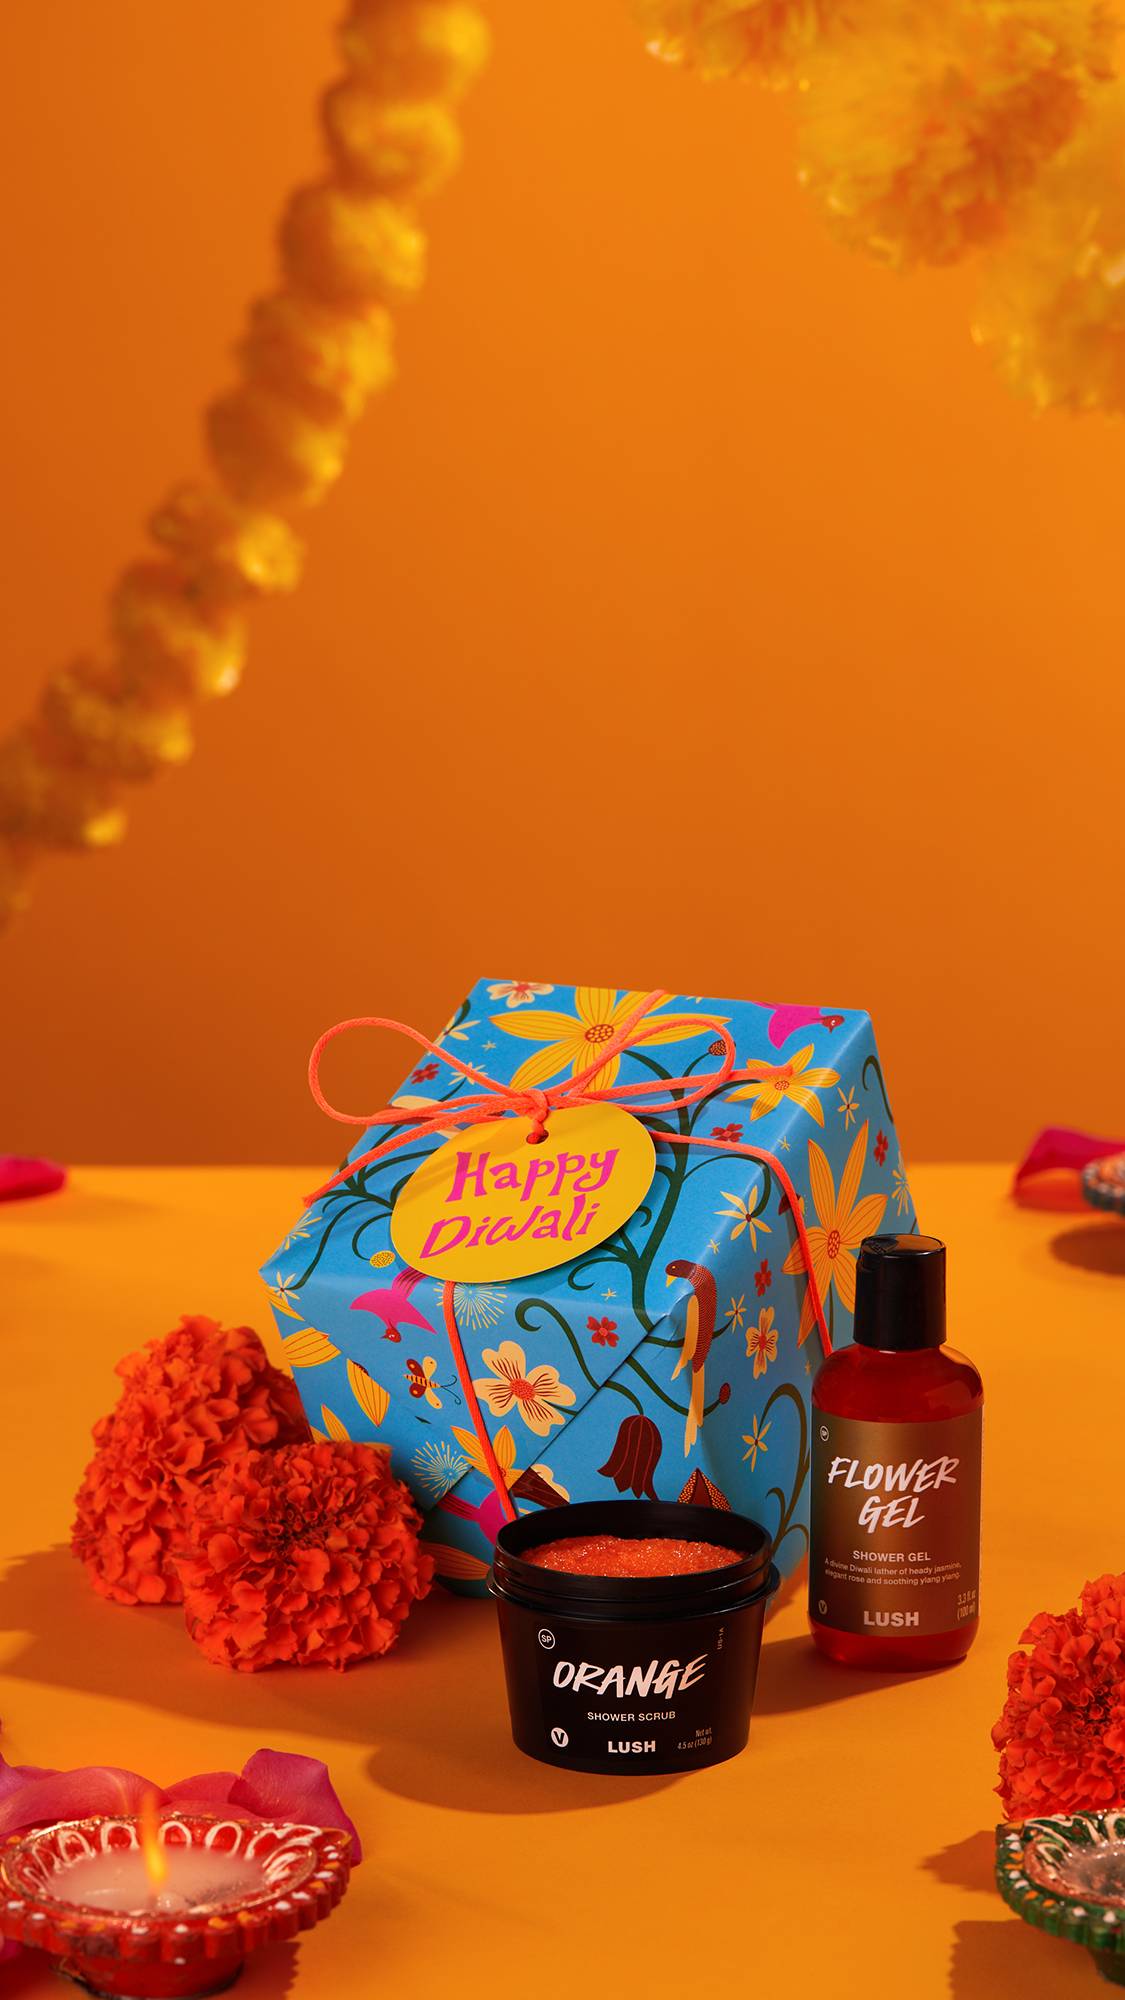 The Happy Diwali gift-wrapped box sits with the shower gel and body scrub on a bright orange background draped in marigolds.